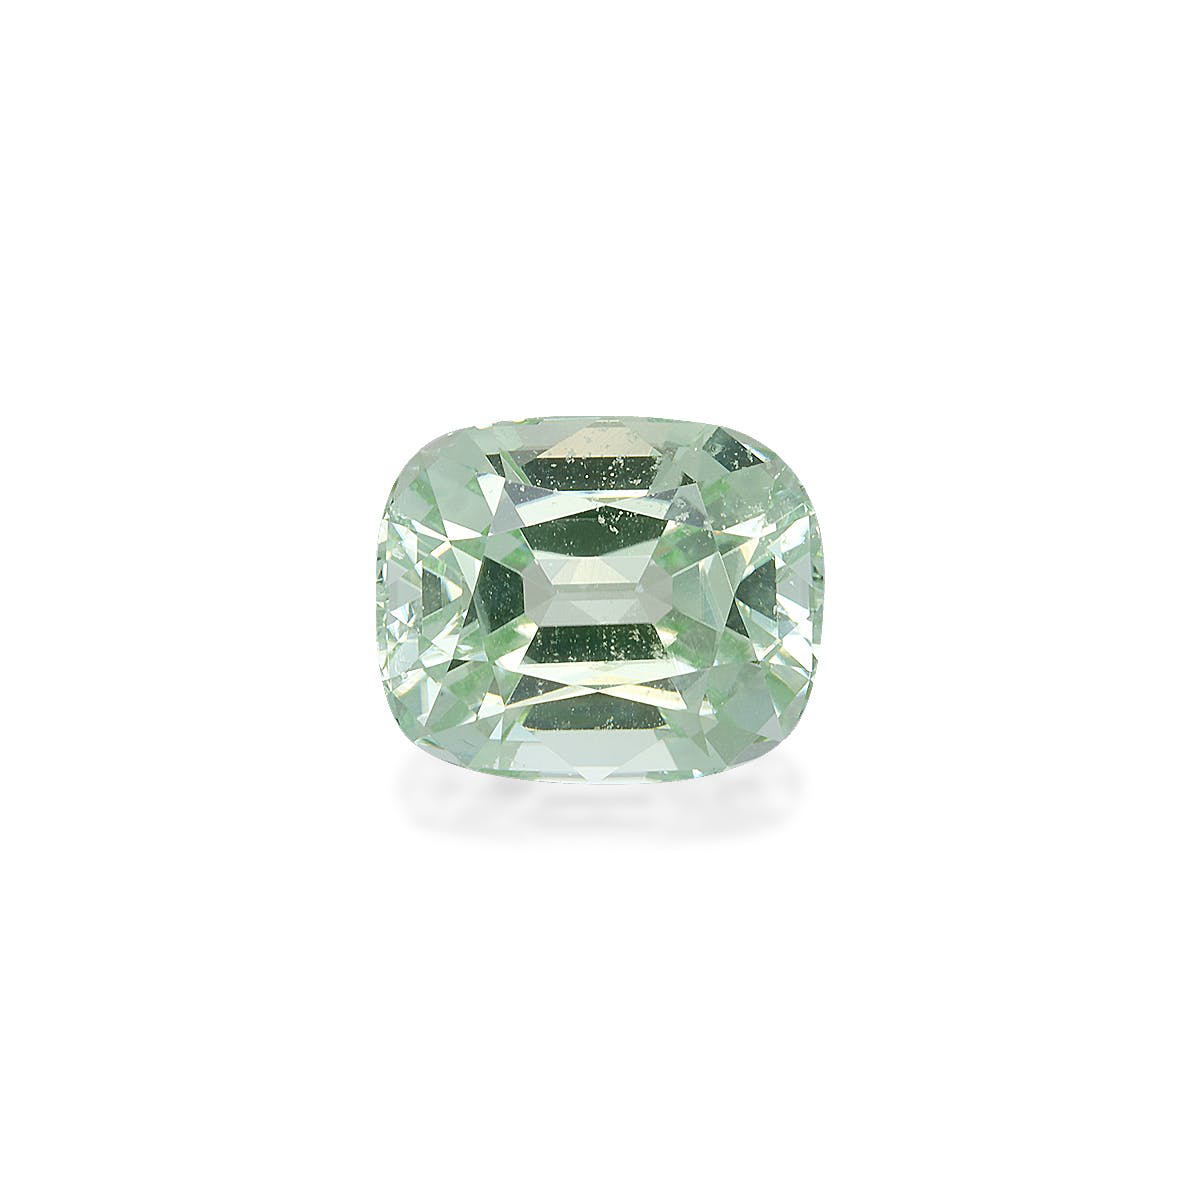 Picture of Mist Green Tourmaline 5.42ct - 11x9mm (TG1582)